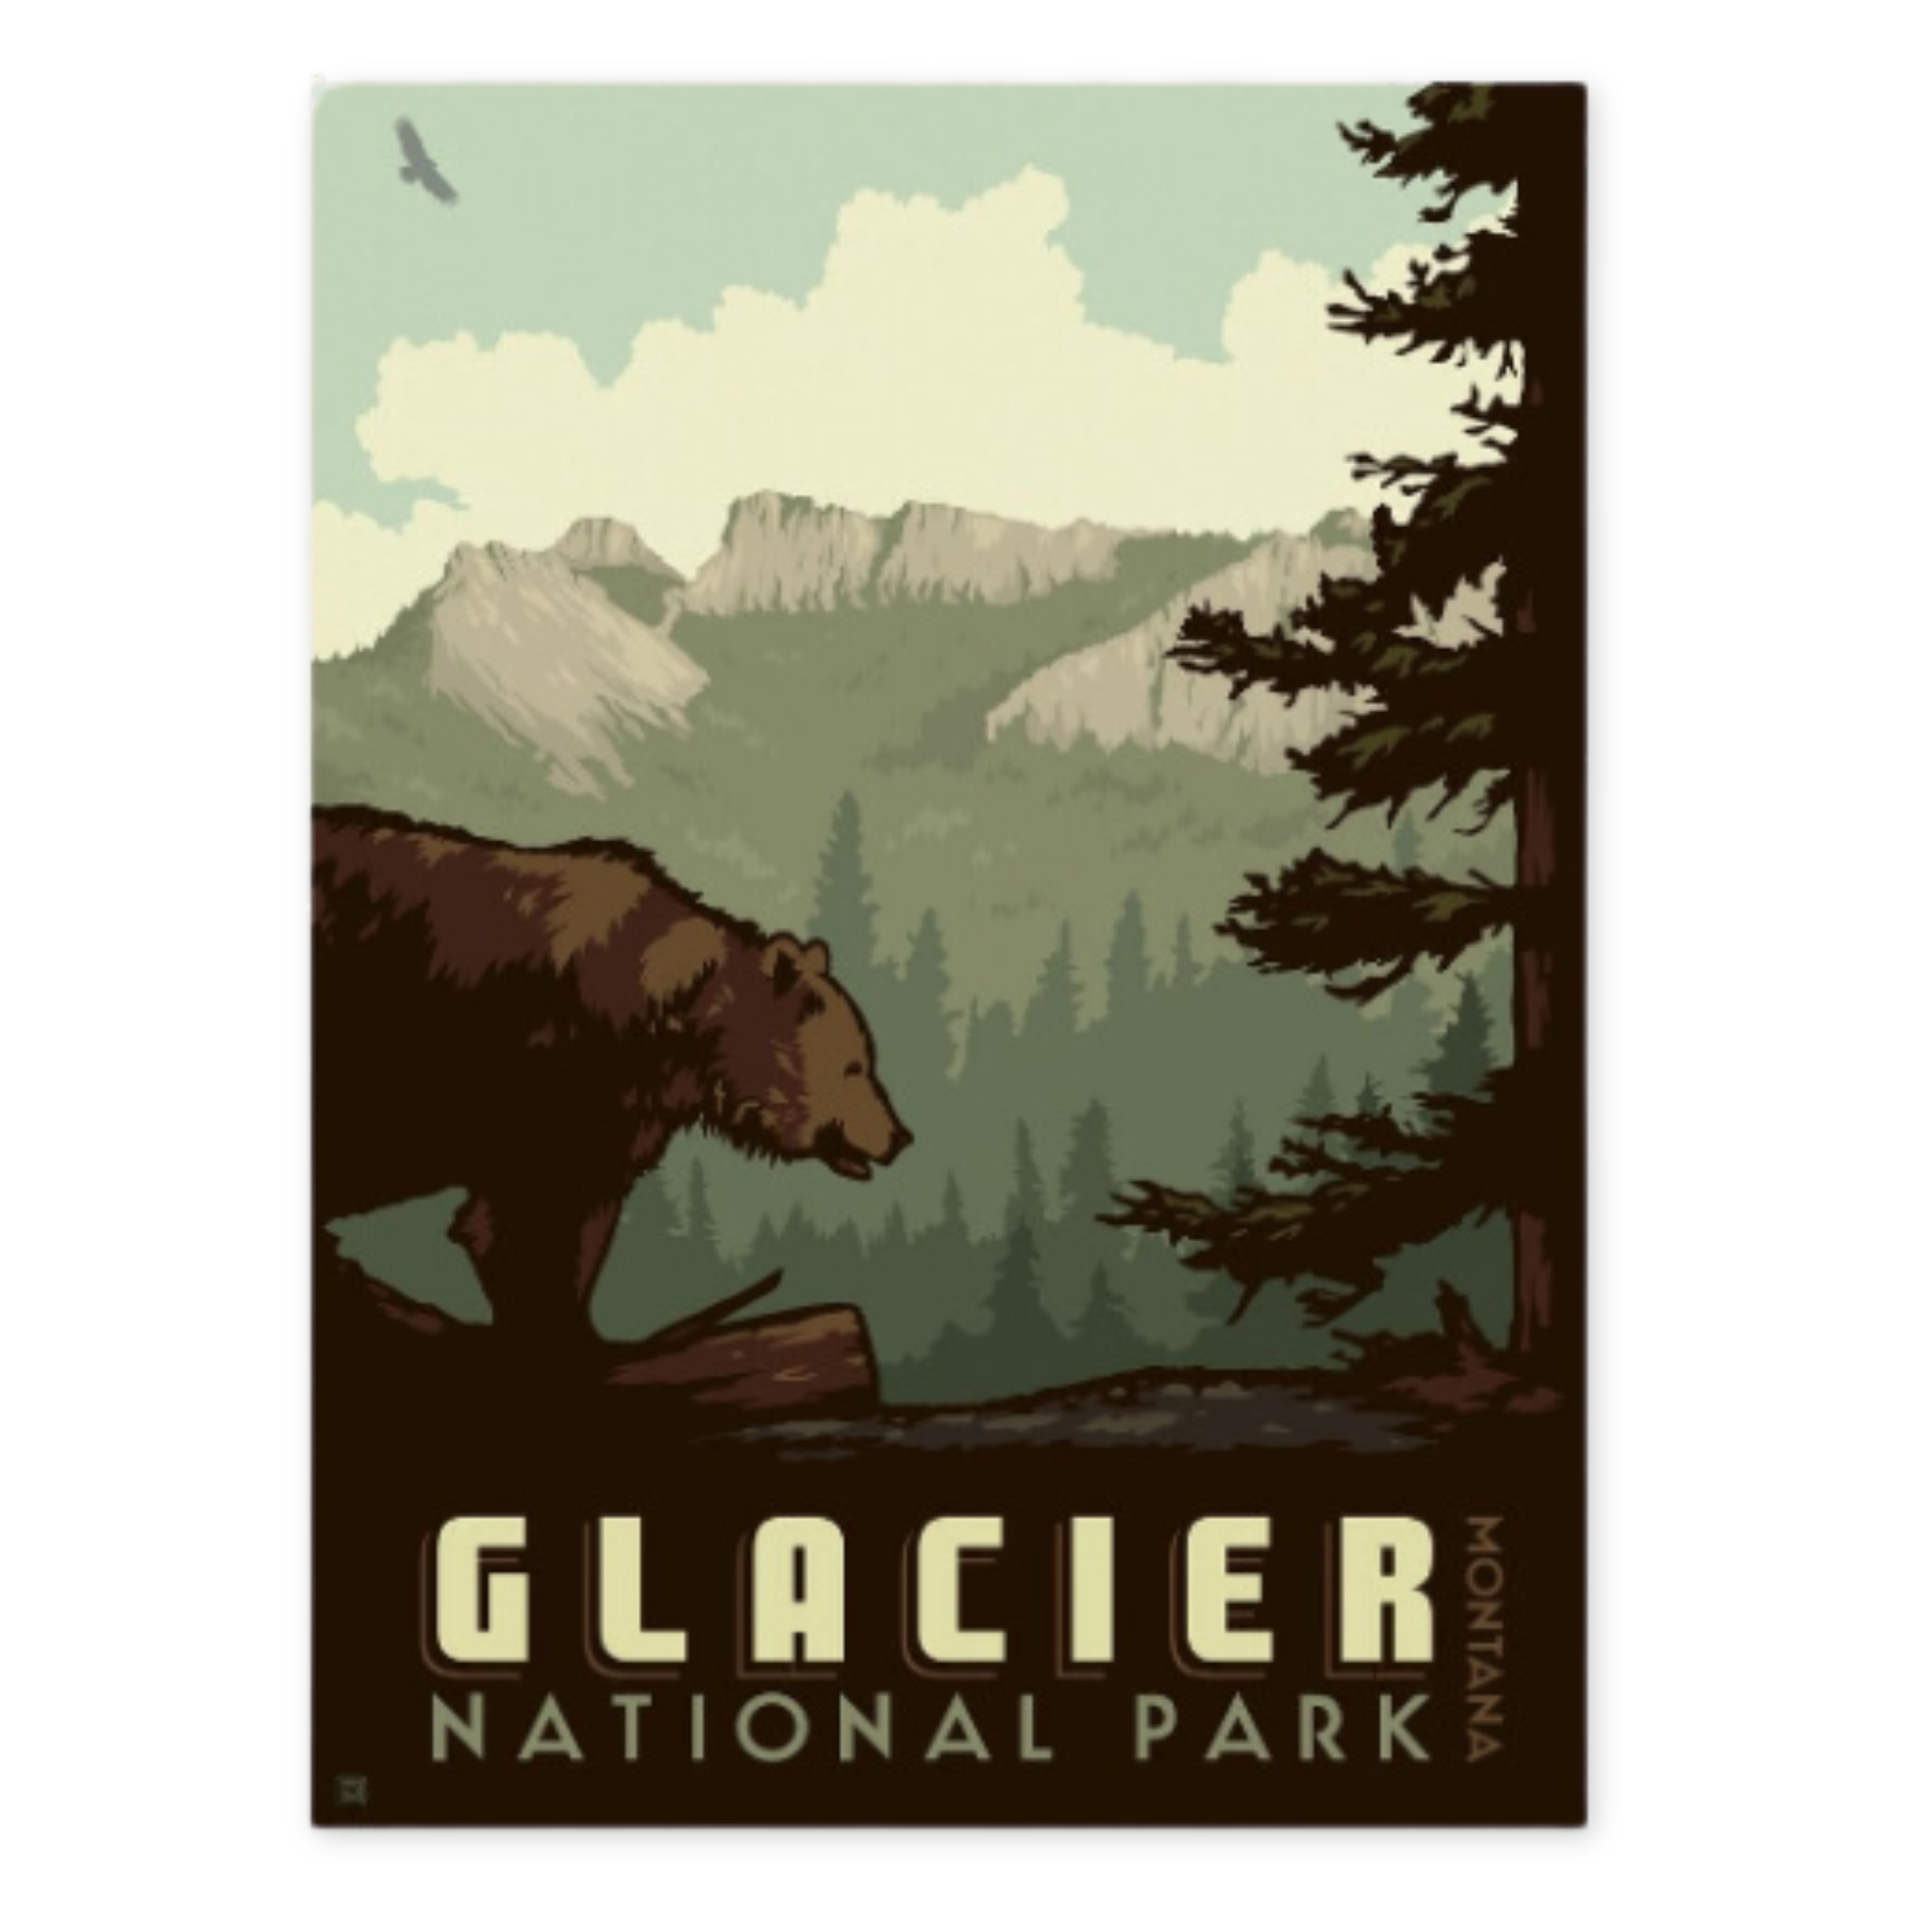 print of glacier national park with an image of a mountain range and a grizzly bear